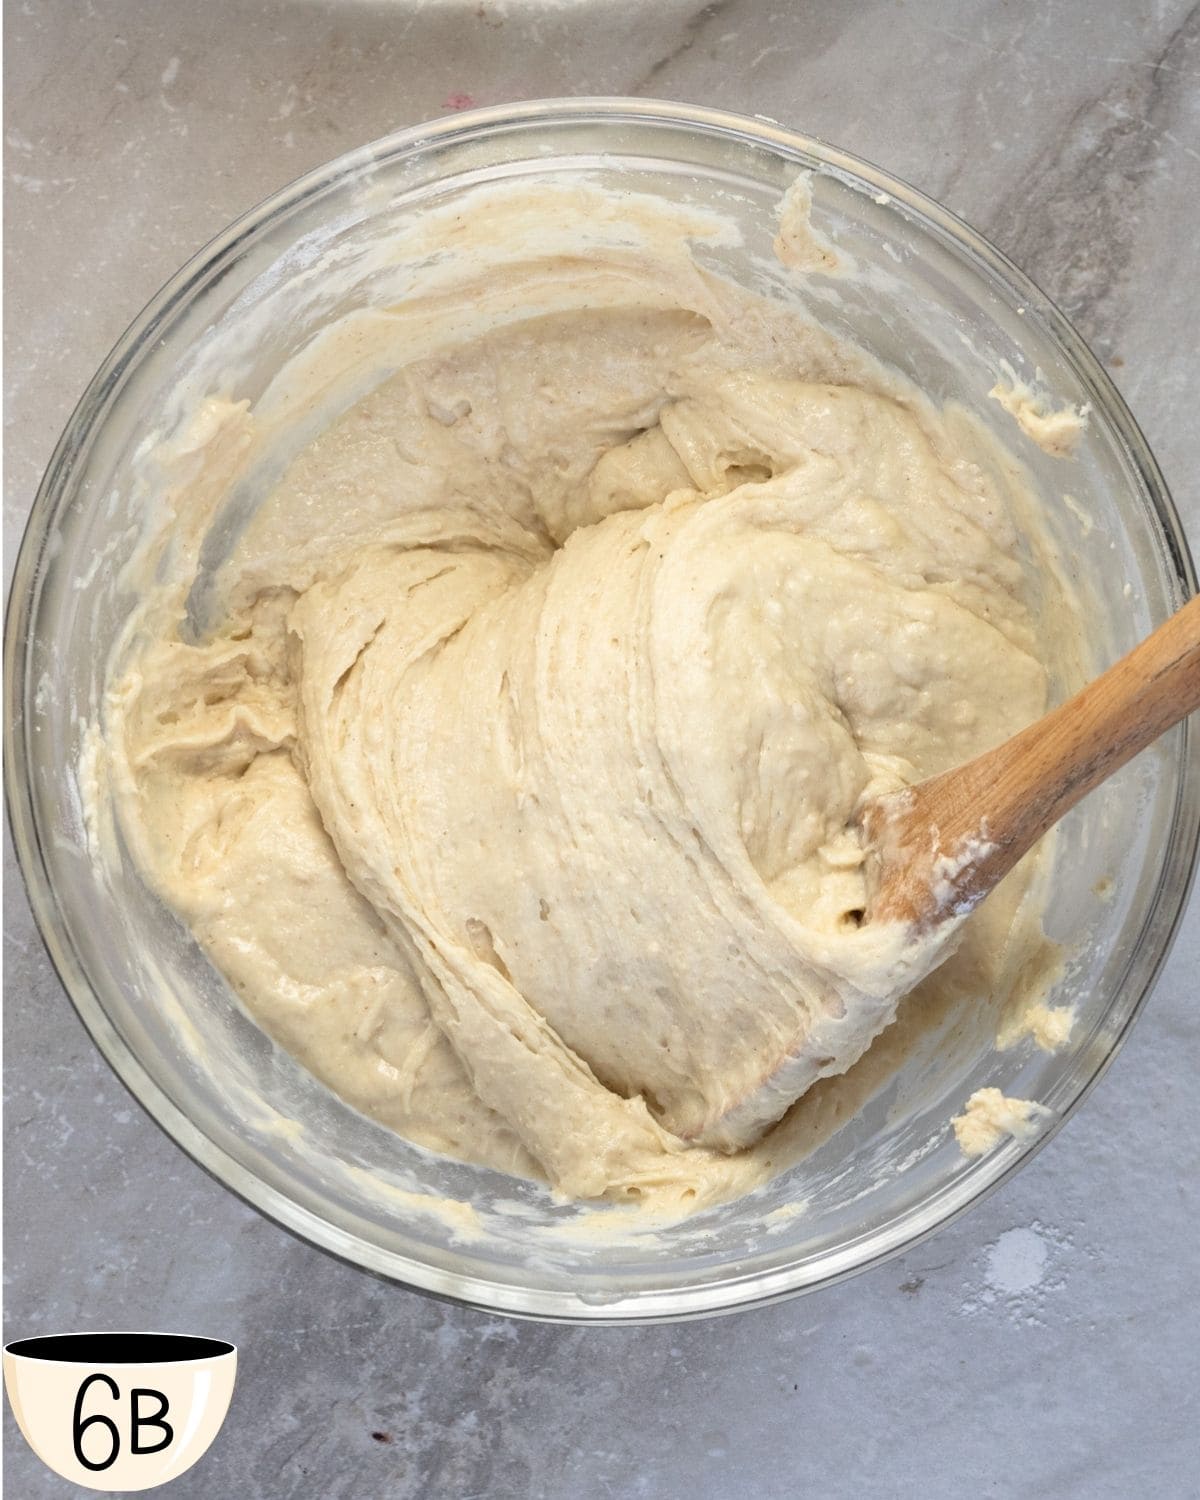 The gluten-free muffin batter fully mixed and rested to show the consistency of the batter and that it is ready for the addition of chocolate chips, with the wooden spoon resting in the bowl.